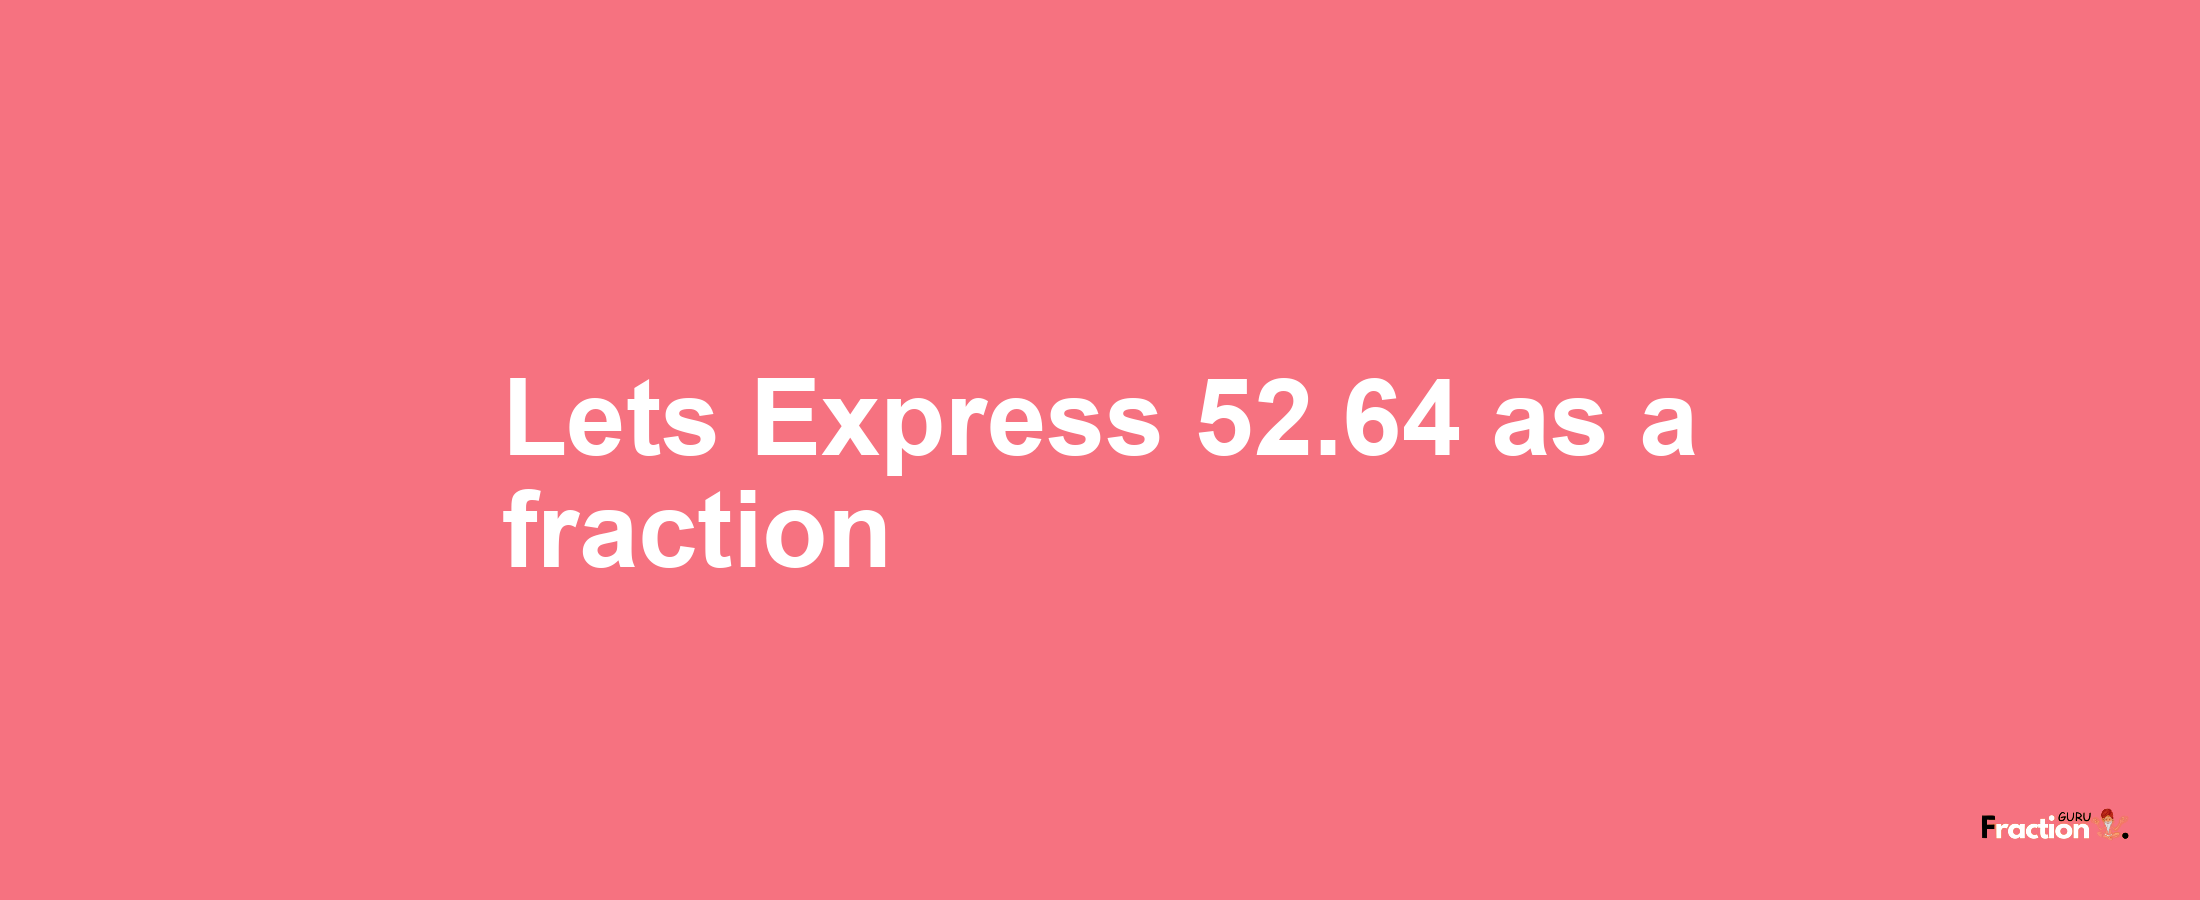 Lets Express 52.64 as afraction